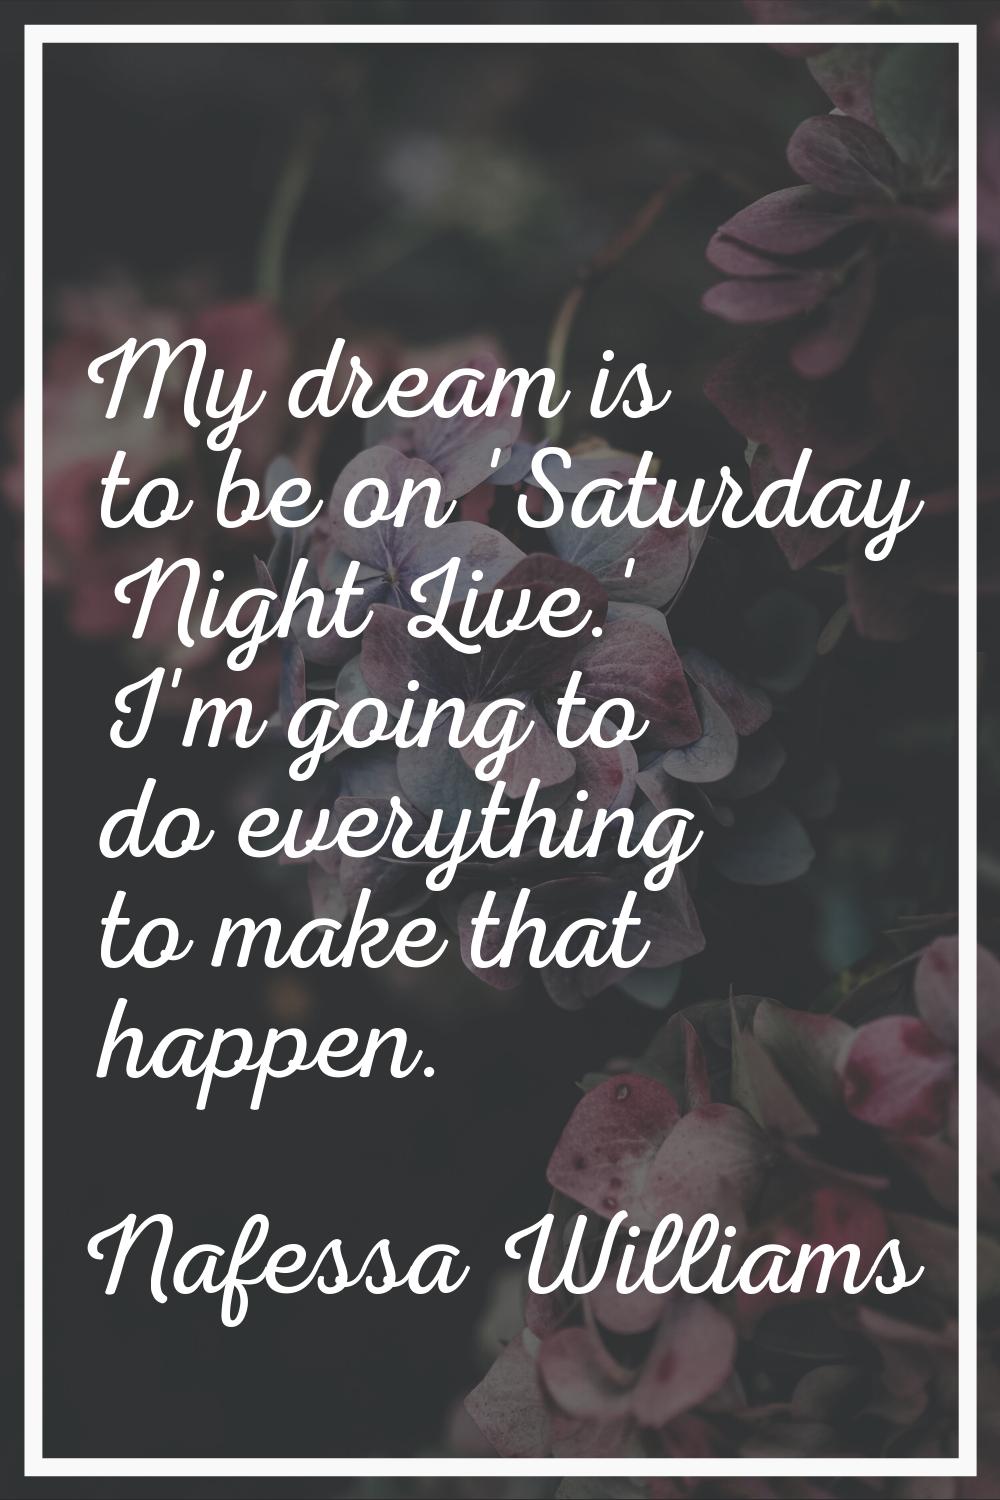 My dream is to be on 'Saturday Night Live.' I'm going to do everything to make that happen.